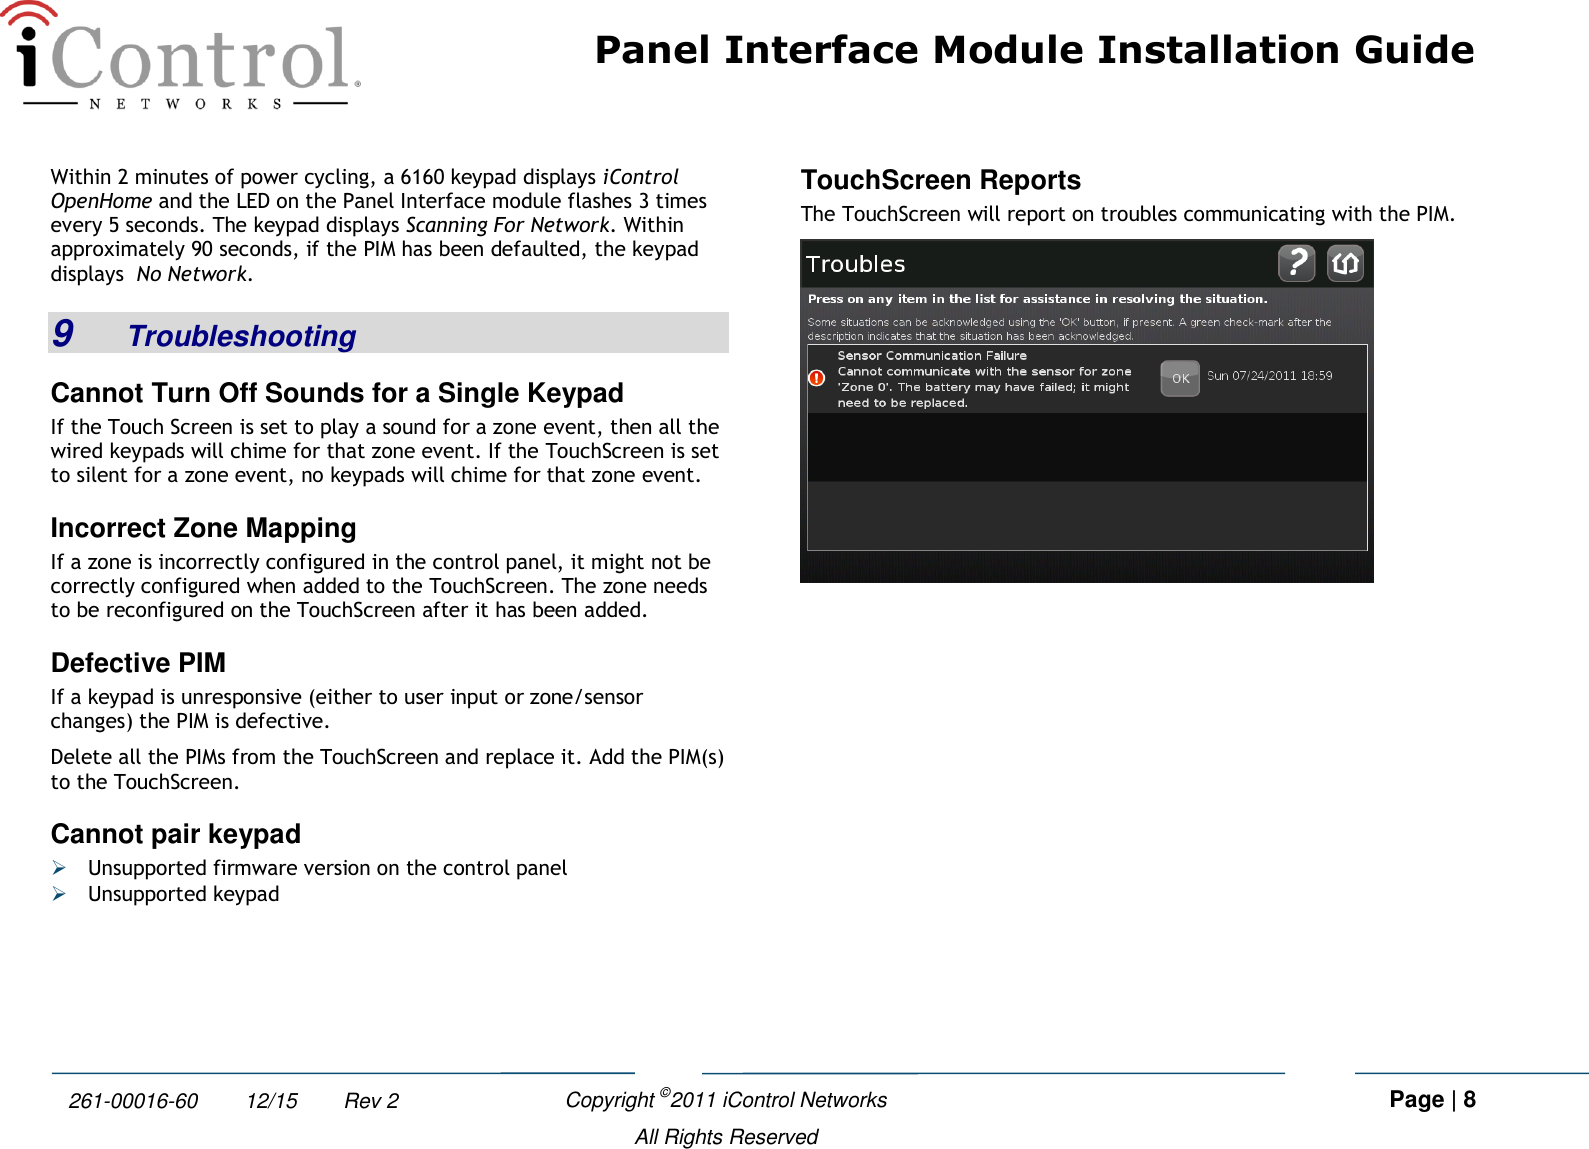 Panel Interface Module Installation Guide    Copyright ©2011 iControl Networks   Page | 8  All Rights Reserved 261-00016-60        12/15        Rev 2 Within 2 minutes of power cycling, a 6160 keypad displays iControl OpenHome and the LED on the Panel Interface module flashes 3 times every 5 seconds. The keypad displays Scanning For Network. Within approximately 90 seconds, if the PIM has been defaulted, the keypad displays  No Network. 9  Troubleshooting Cannot Turn Off Sounds for a Single Keypad If the Touch Screen is set to play a sound for a zone event, then all the wired keypads will chime for that zone event. If the TouchScreen is set to silent for a zone event, no keypads will chime for that zone event. Incorrect Zone Mapping If a zone is incorrectly configured in the control panel, it might not be correctly configured when added to the TouchScreen. The zone needs to be reconfigured on the TouchScreen after it has been added. Defective PIM If a keypad is unresponsive (either to user input or zone/sensor changes) the PIM is defective. Delete all the PIMs from the TouchScreen and replace it. Add the PIM(s) to the TouchScreen. Cannot pair keypad  Unsupported firmware version on the control panel  Unsupported keypad TouchScreen Reports  The TouchScreen will report on troubles communicating with the PIM.  